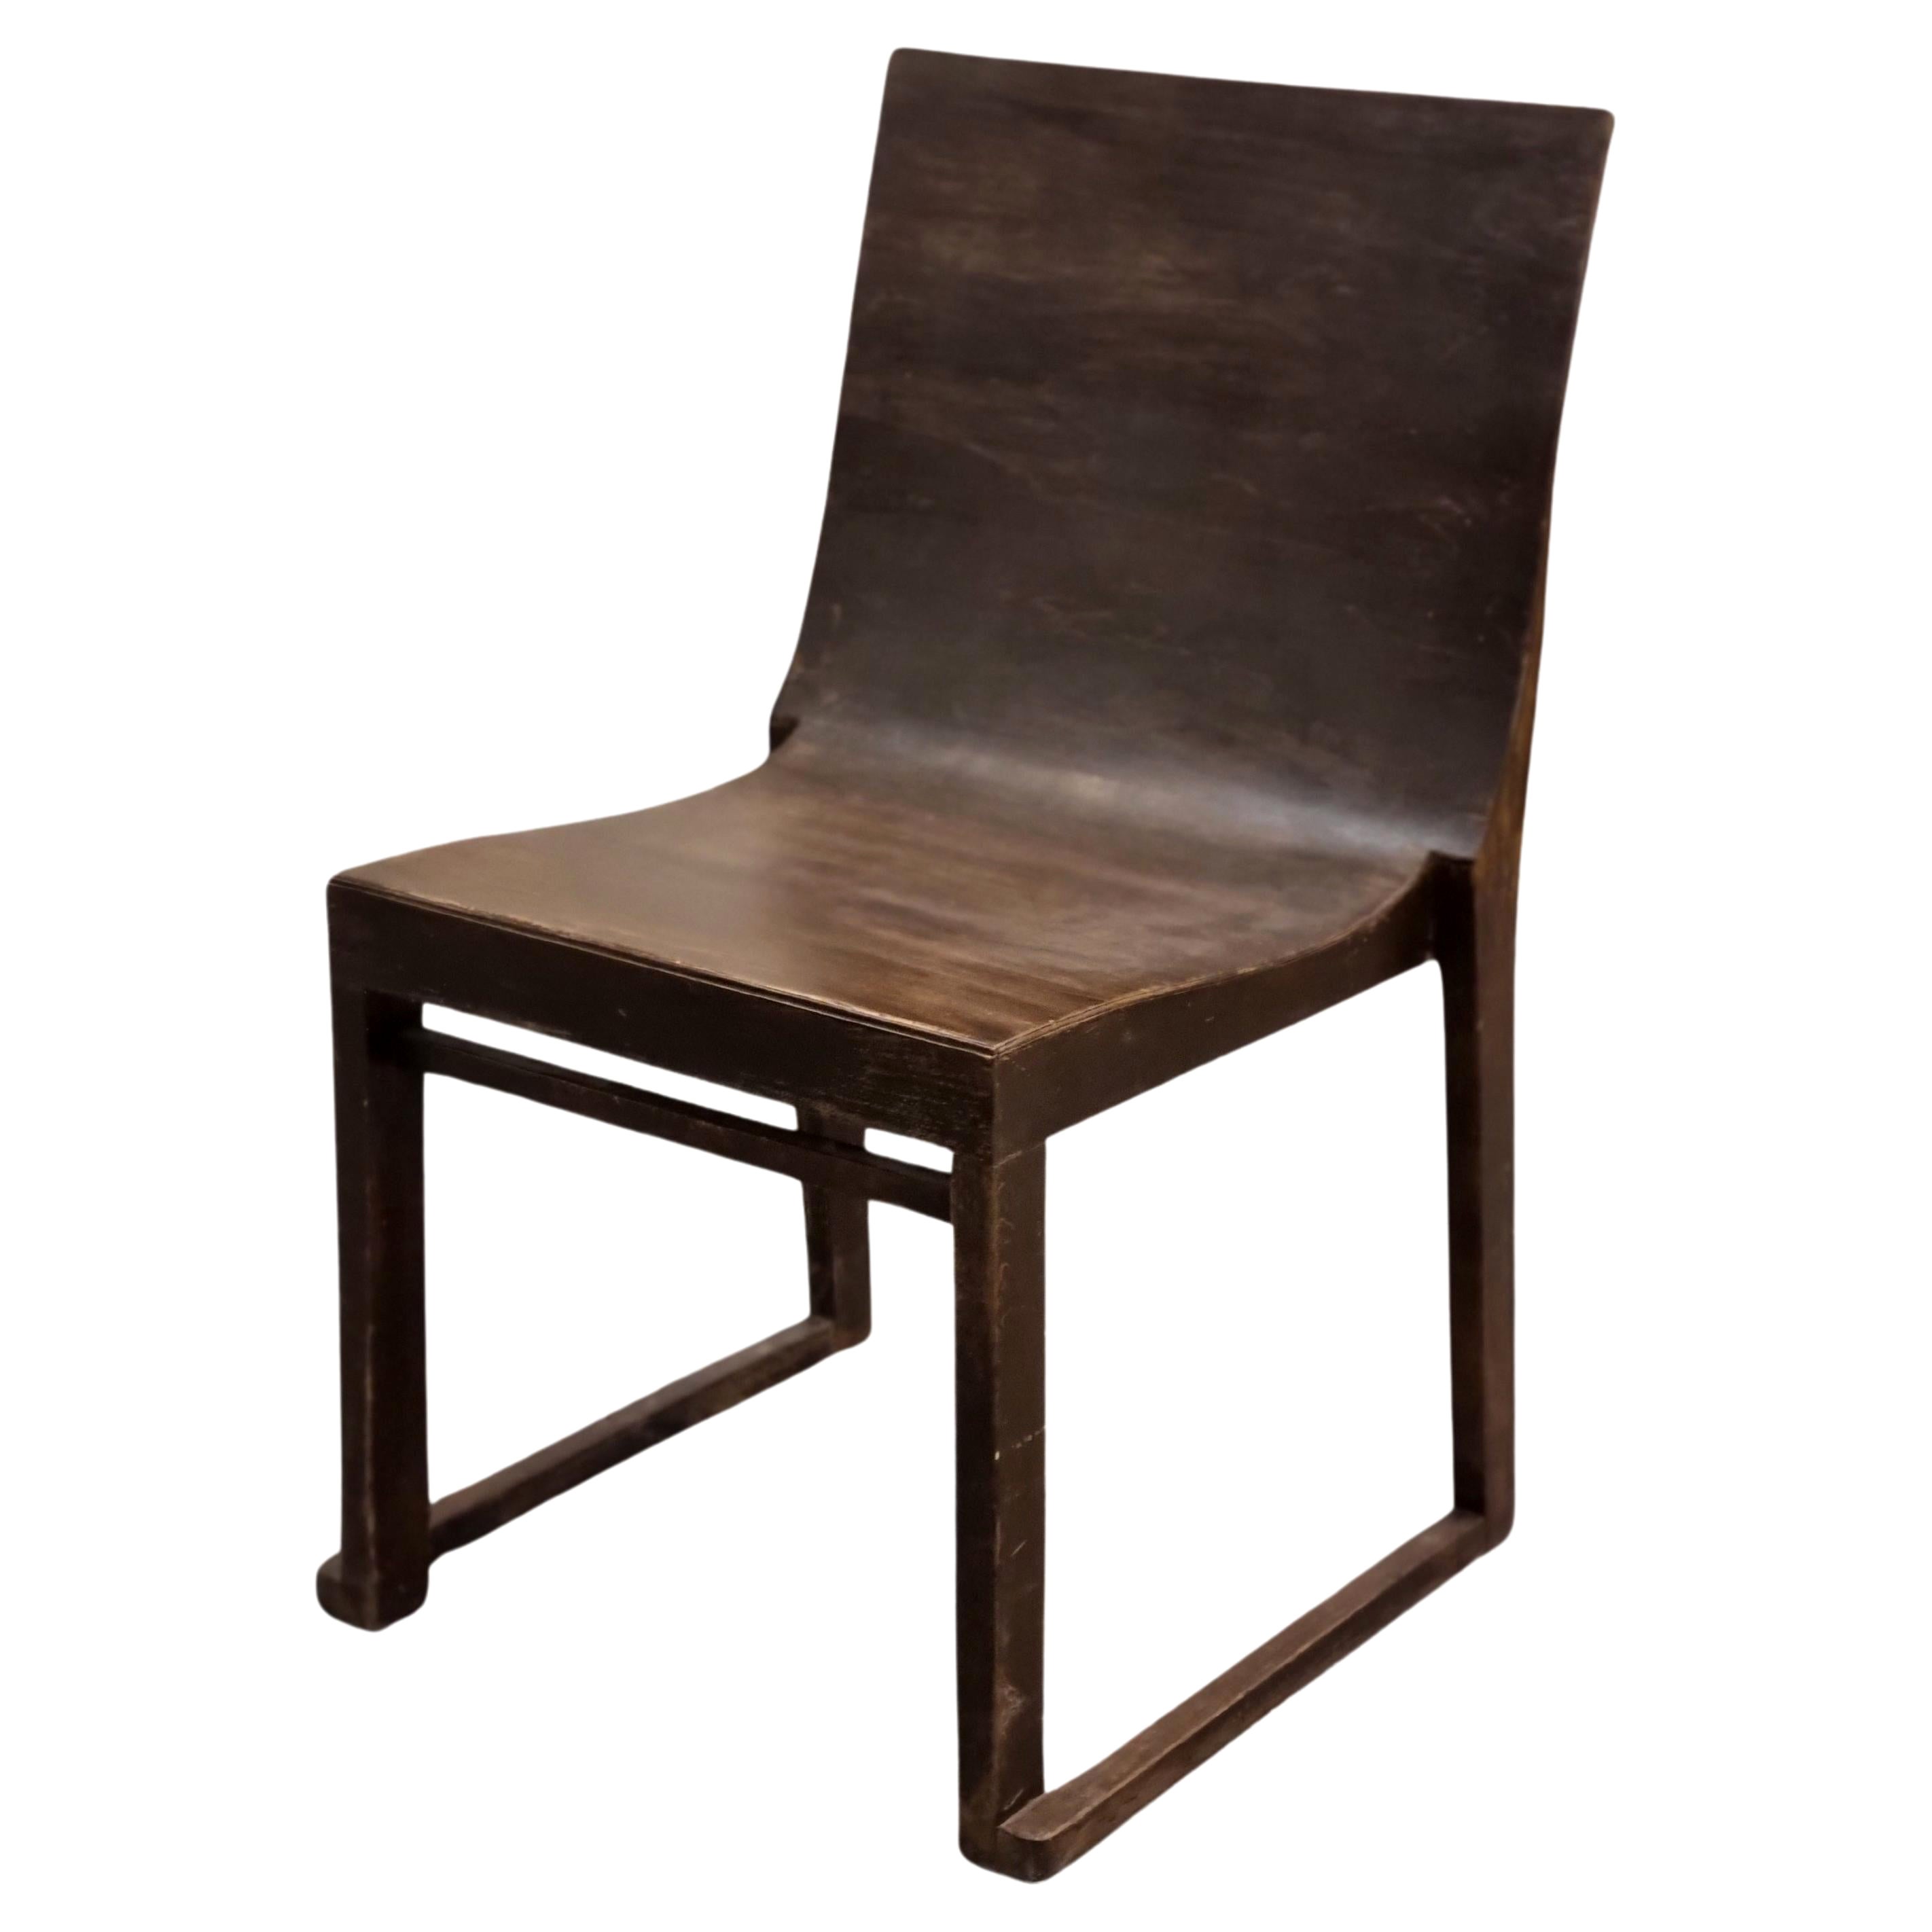 Alvar Aalto "Chair of Our Times", a Collector's Gem For Sale